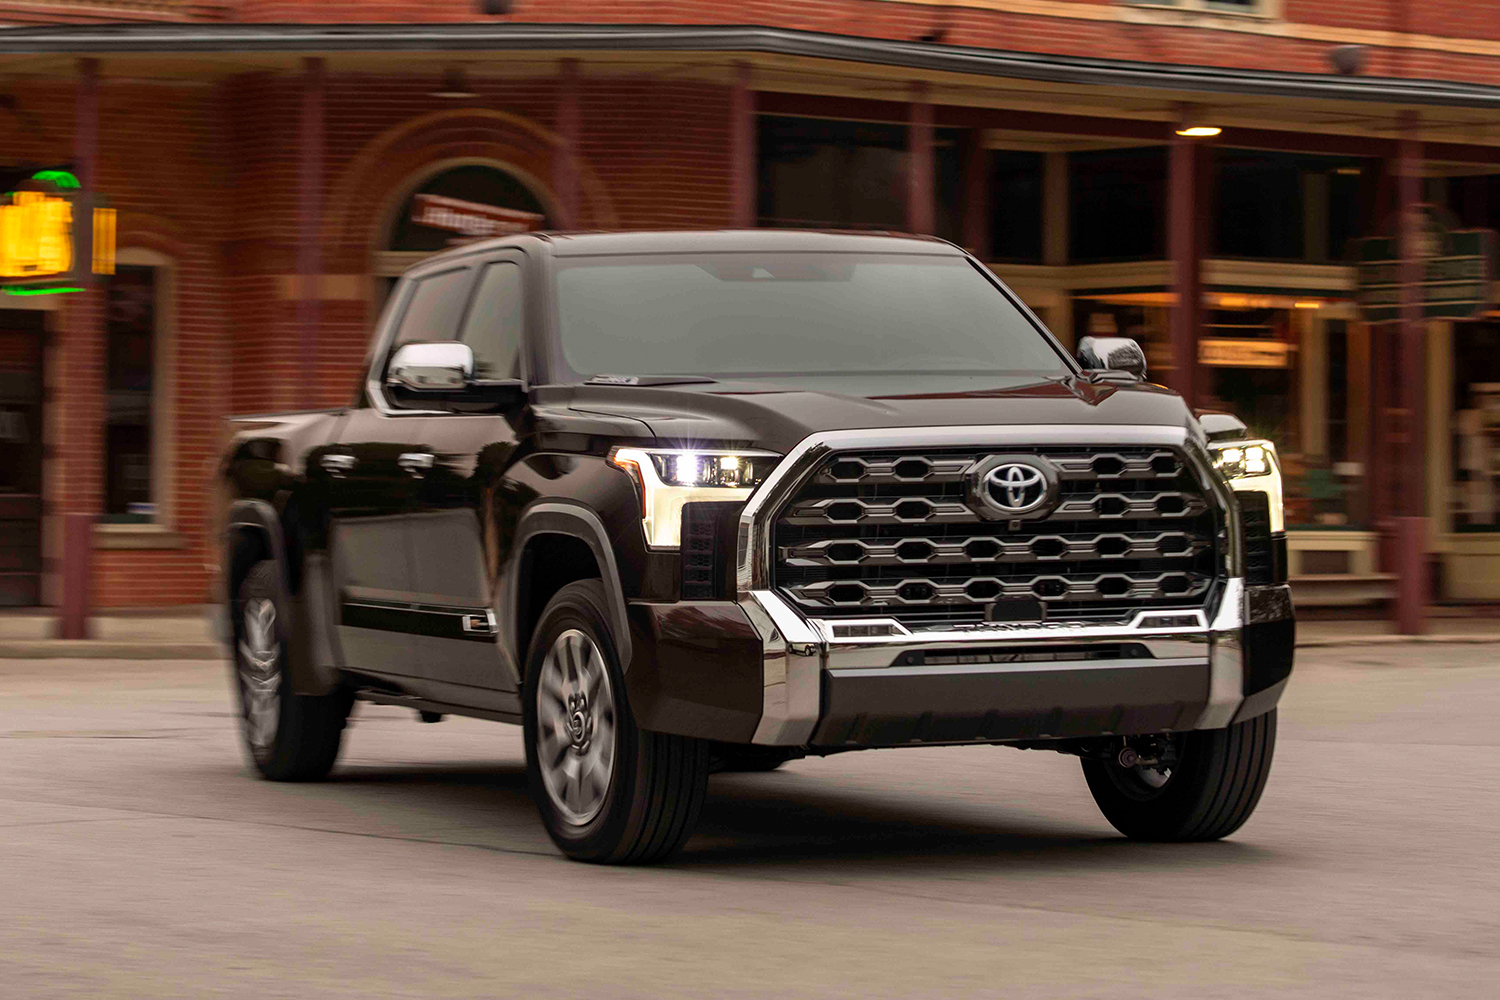 Review: The Redesigned Toyota Tundra Finally Catches Up to the Pack